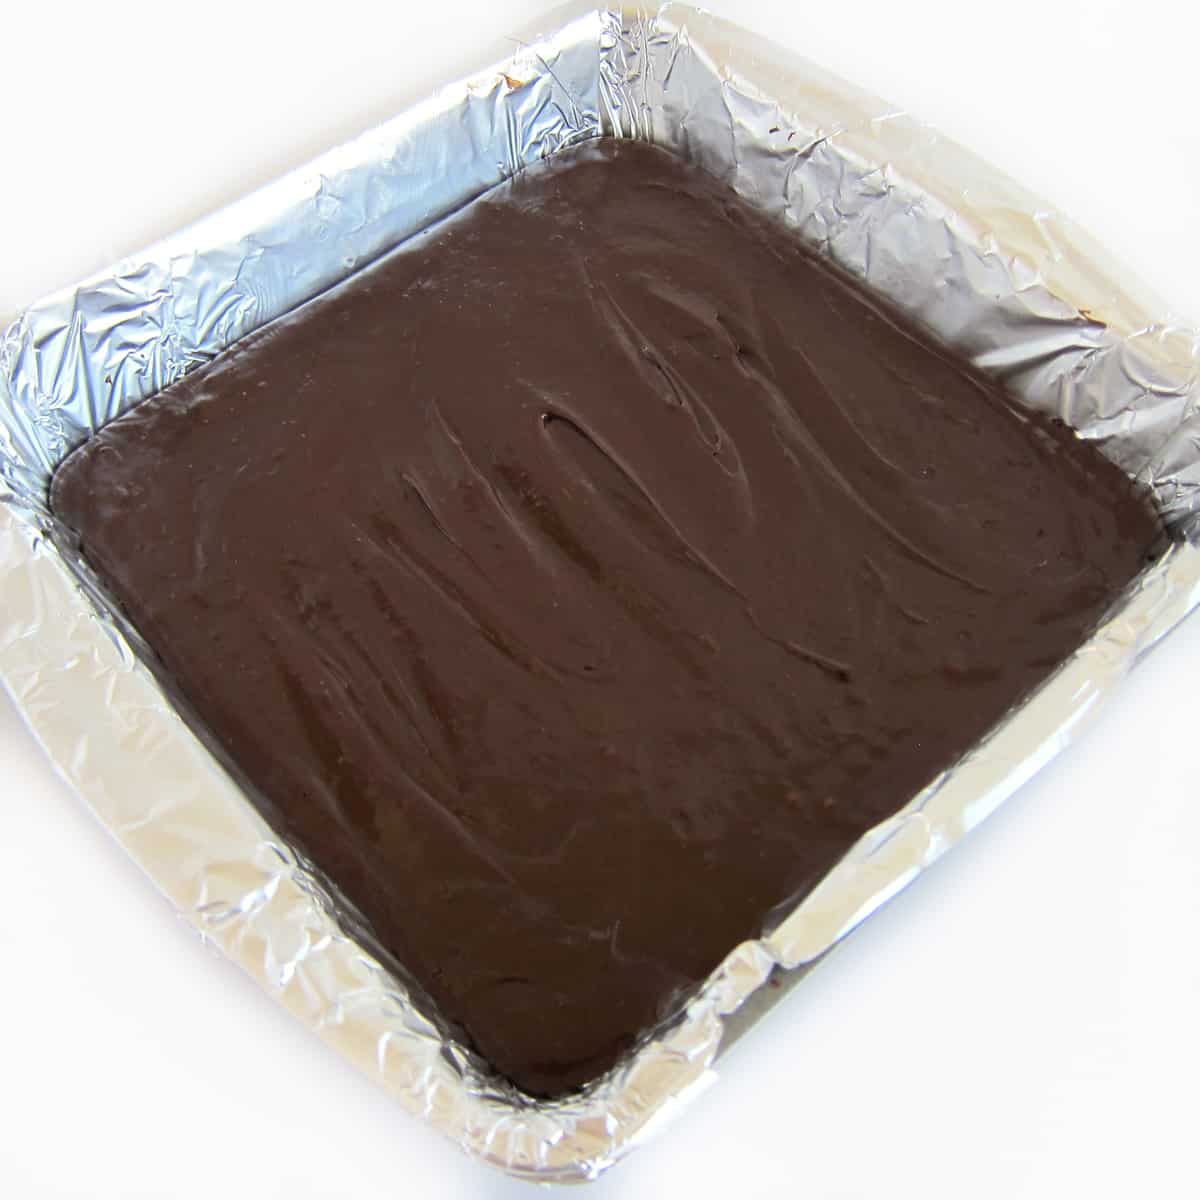 8-inch square pan filled with chocolate Amaretto fudge